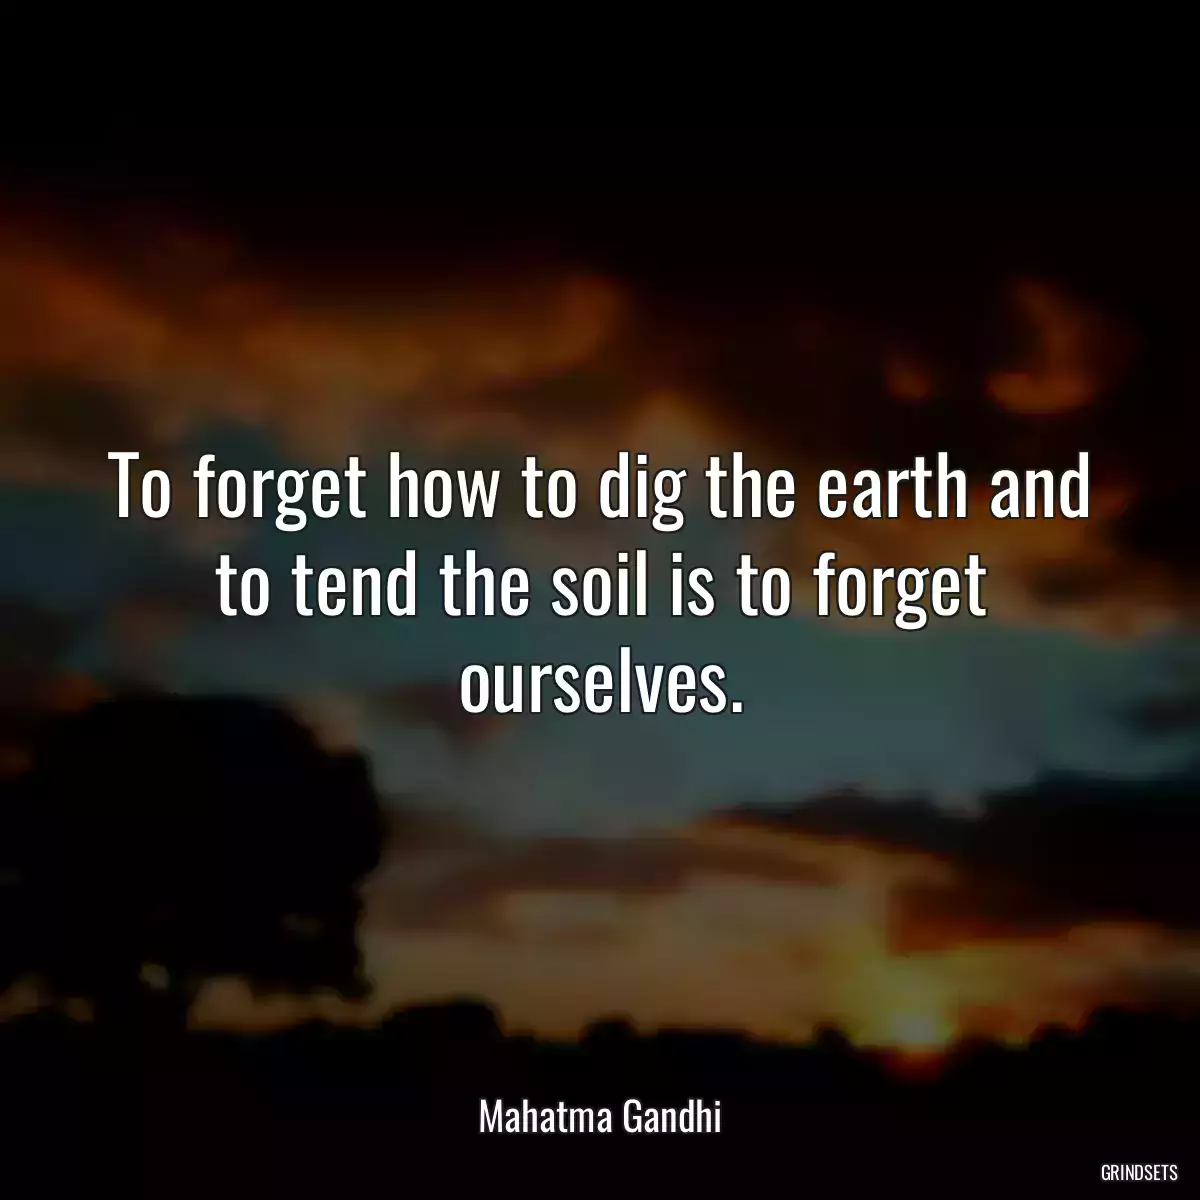 To forget how to dig the earth and to tend the soil is to forget ourselves.